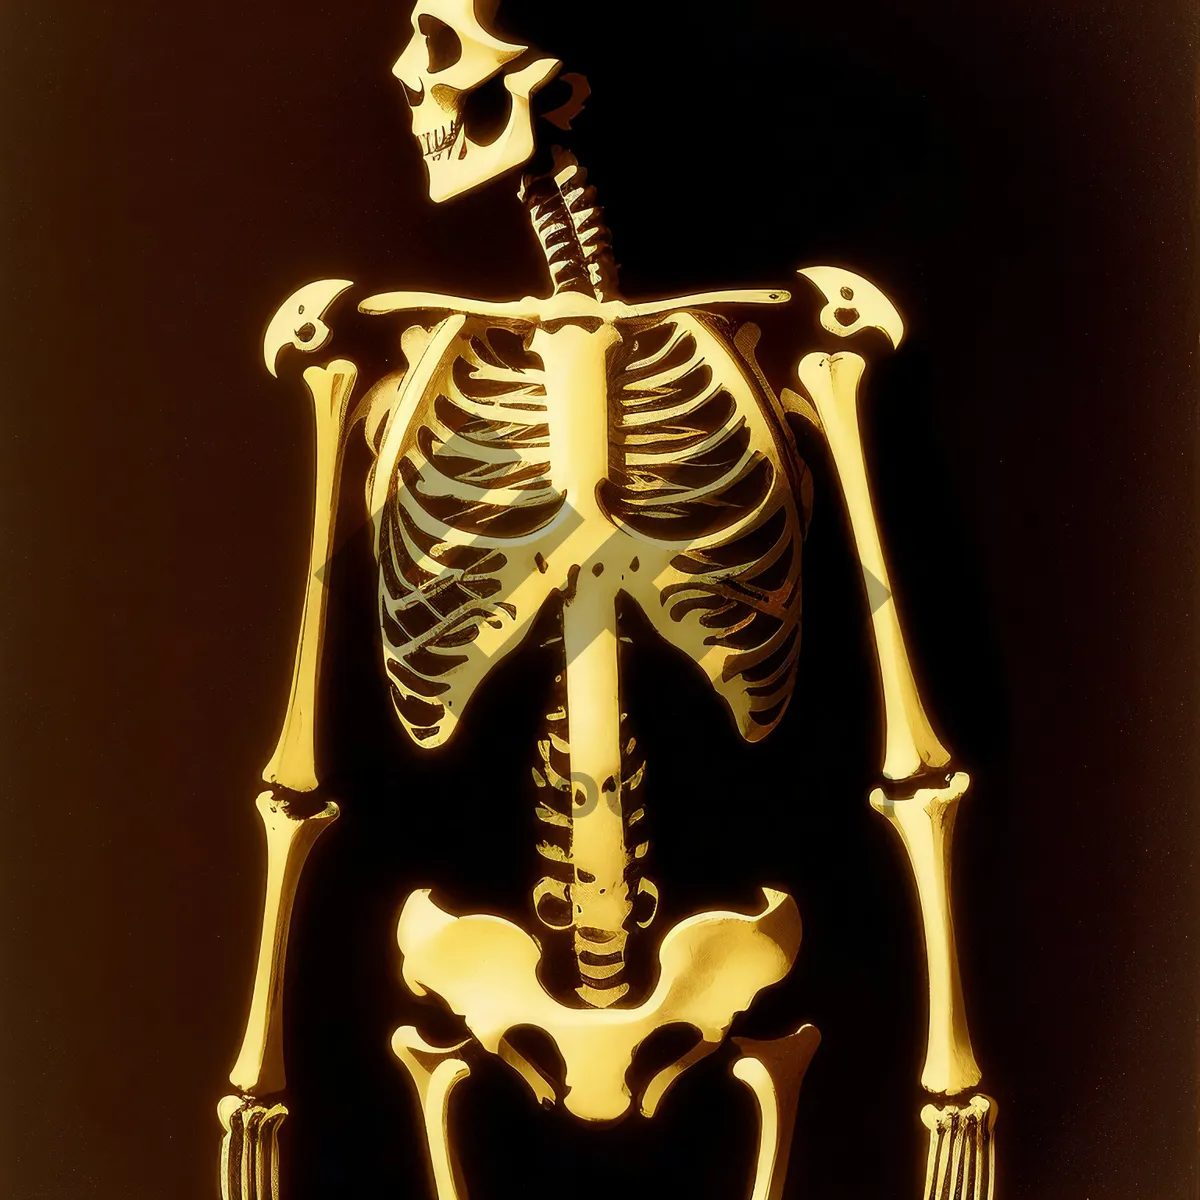 Picture of Human Skeletal Structure - X-ray Visualization of Spinal Anatomy